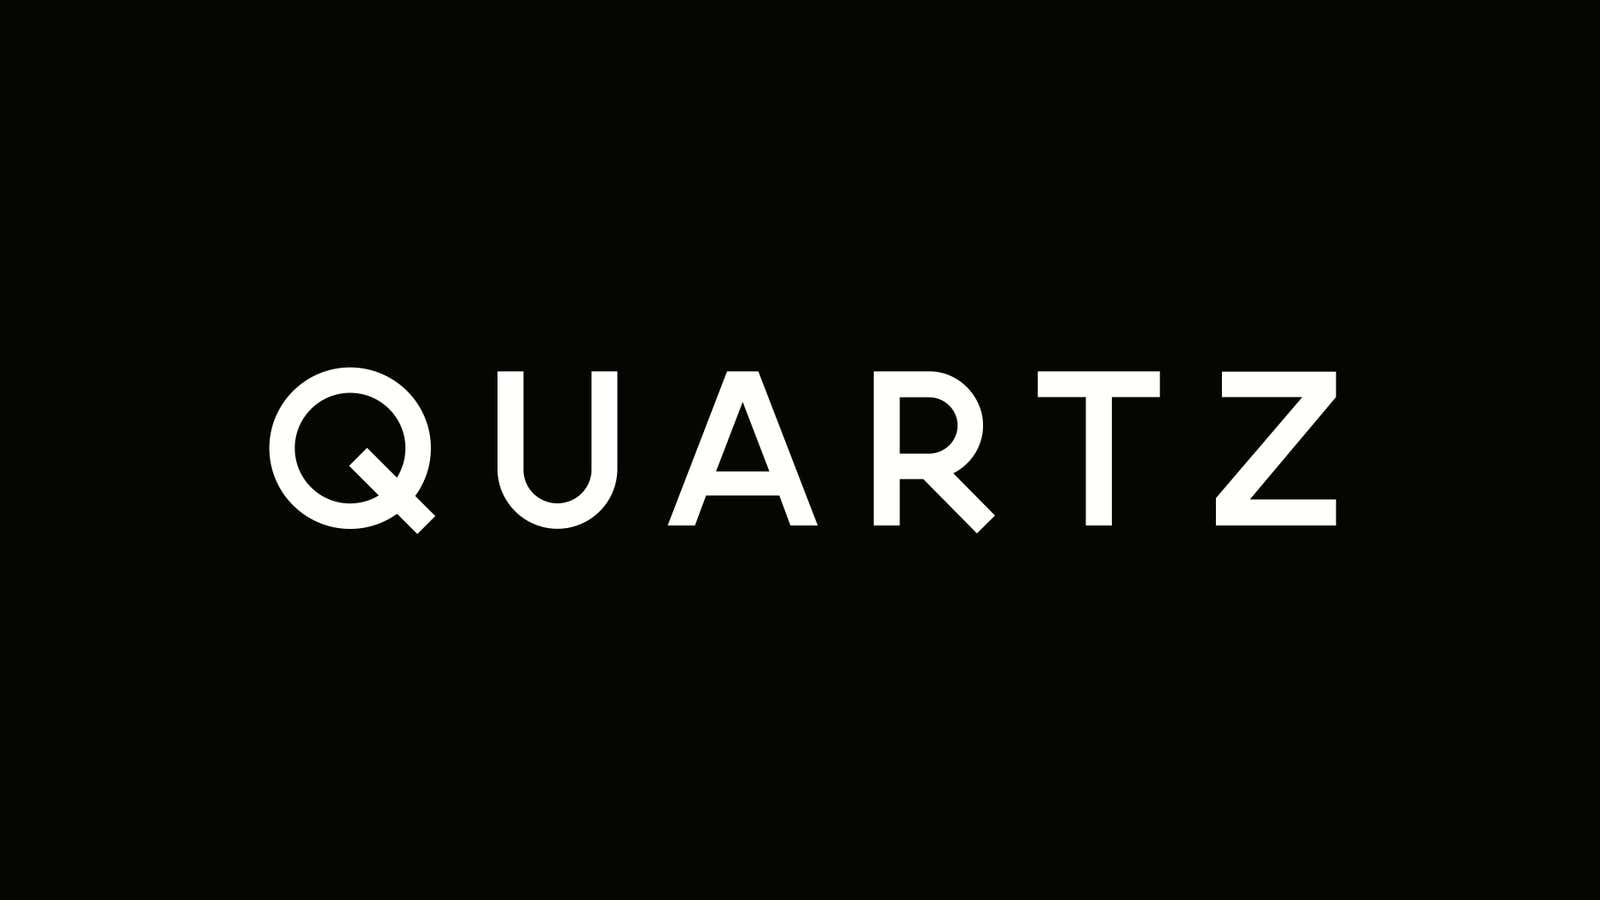 Quartz Daily Brief—Europe and Africa edition—An Indian IPO, McDonald’s meets investors, airplane rainbows